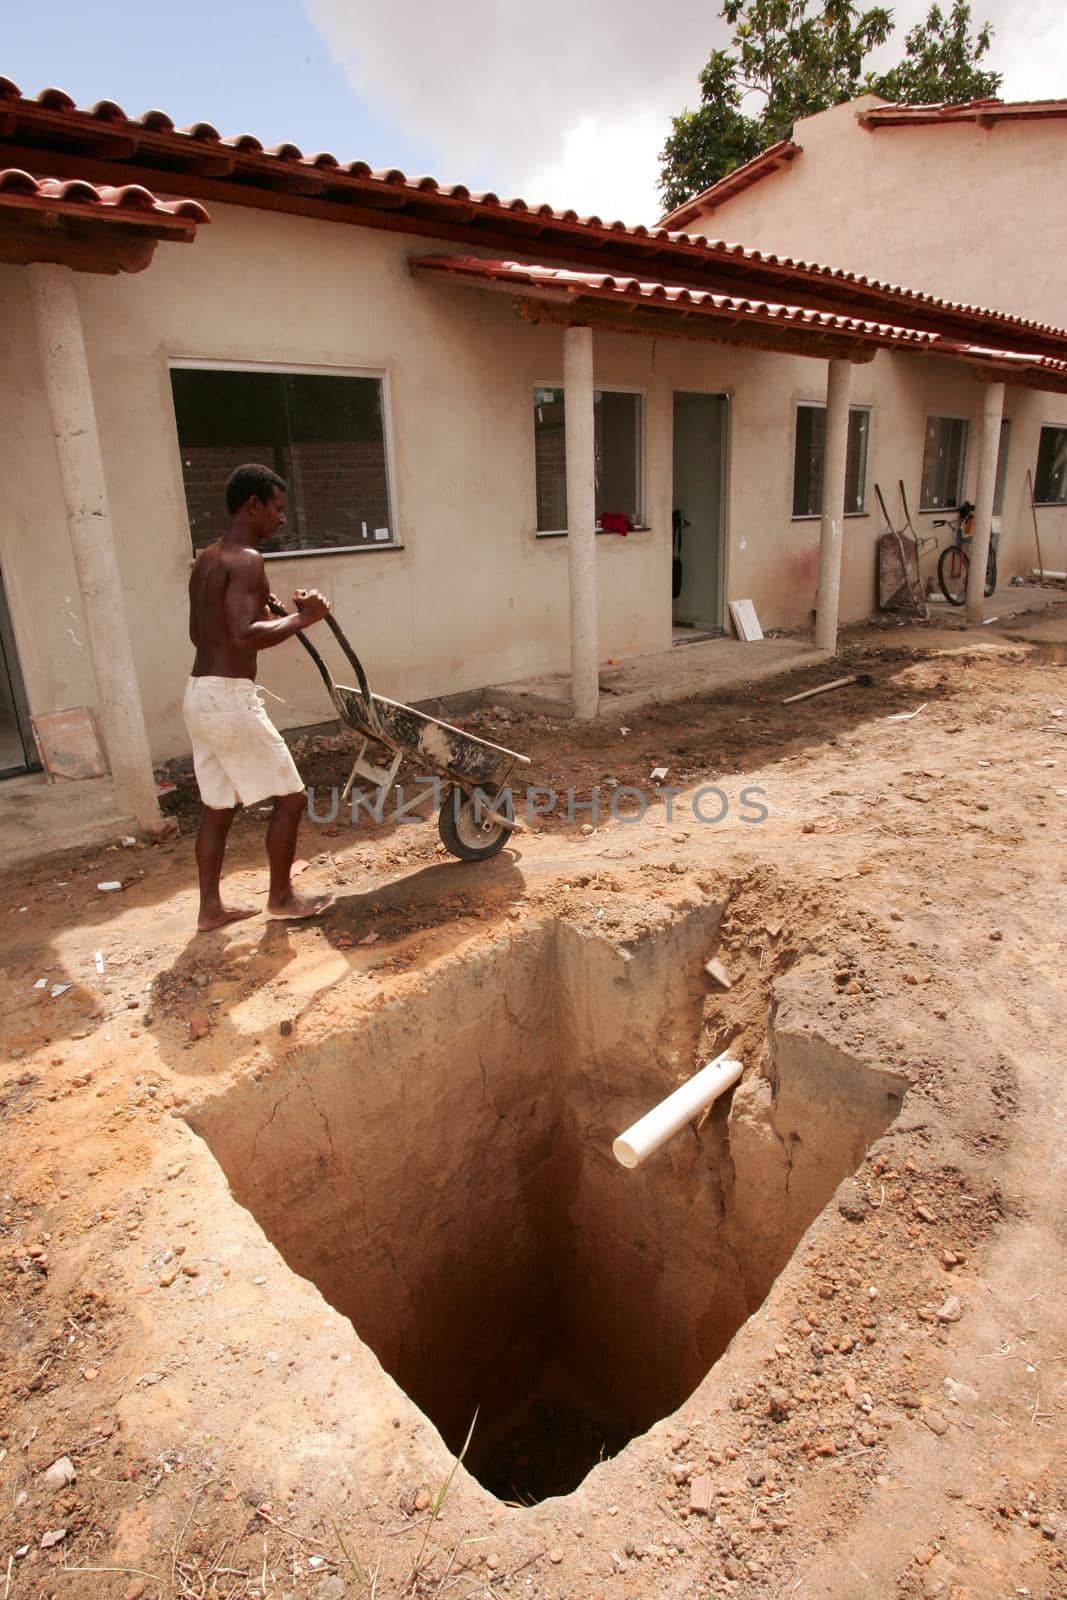 eunapolis, bahia, brazil - february 3, 2010: hole for construction of a septic tank in a residence in the city of Eunapolis.